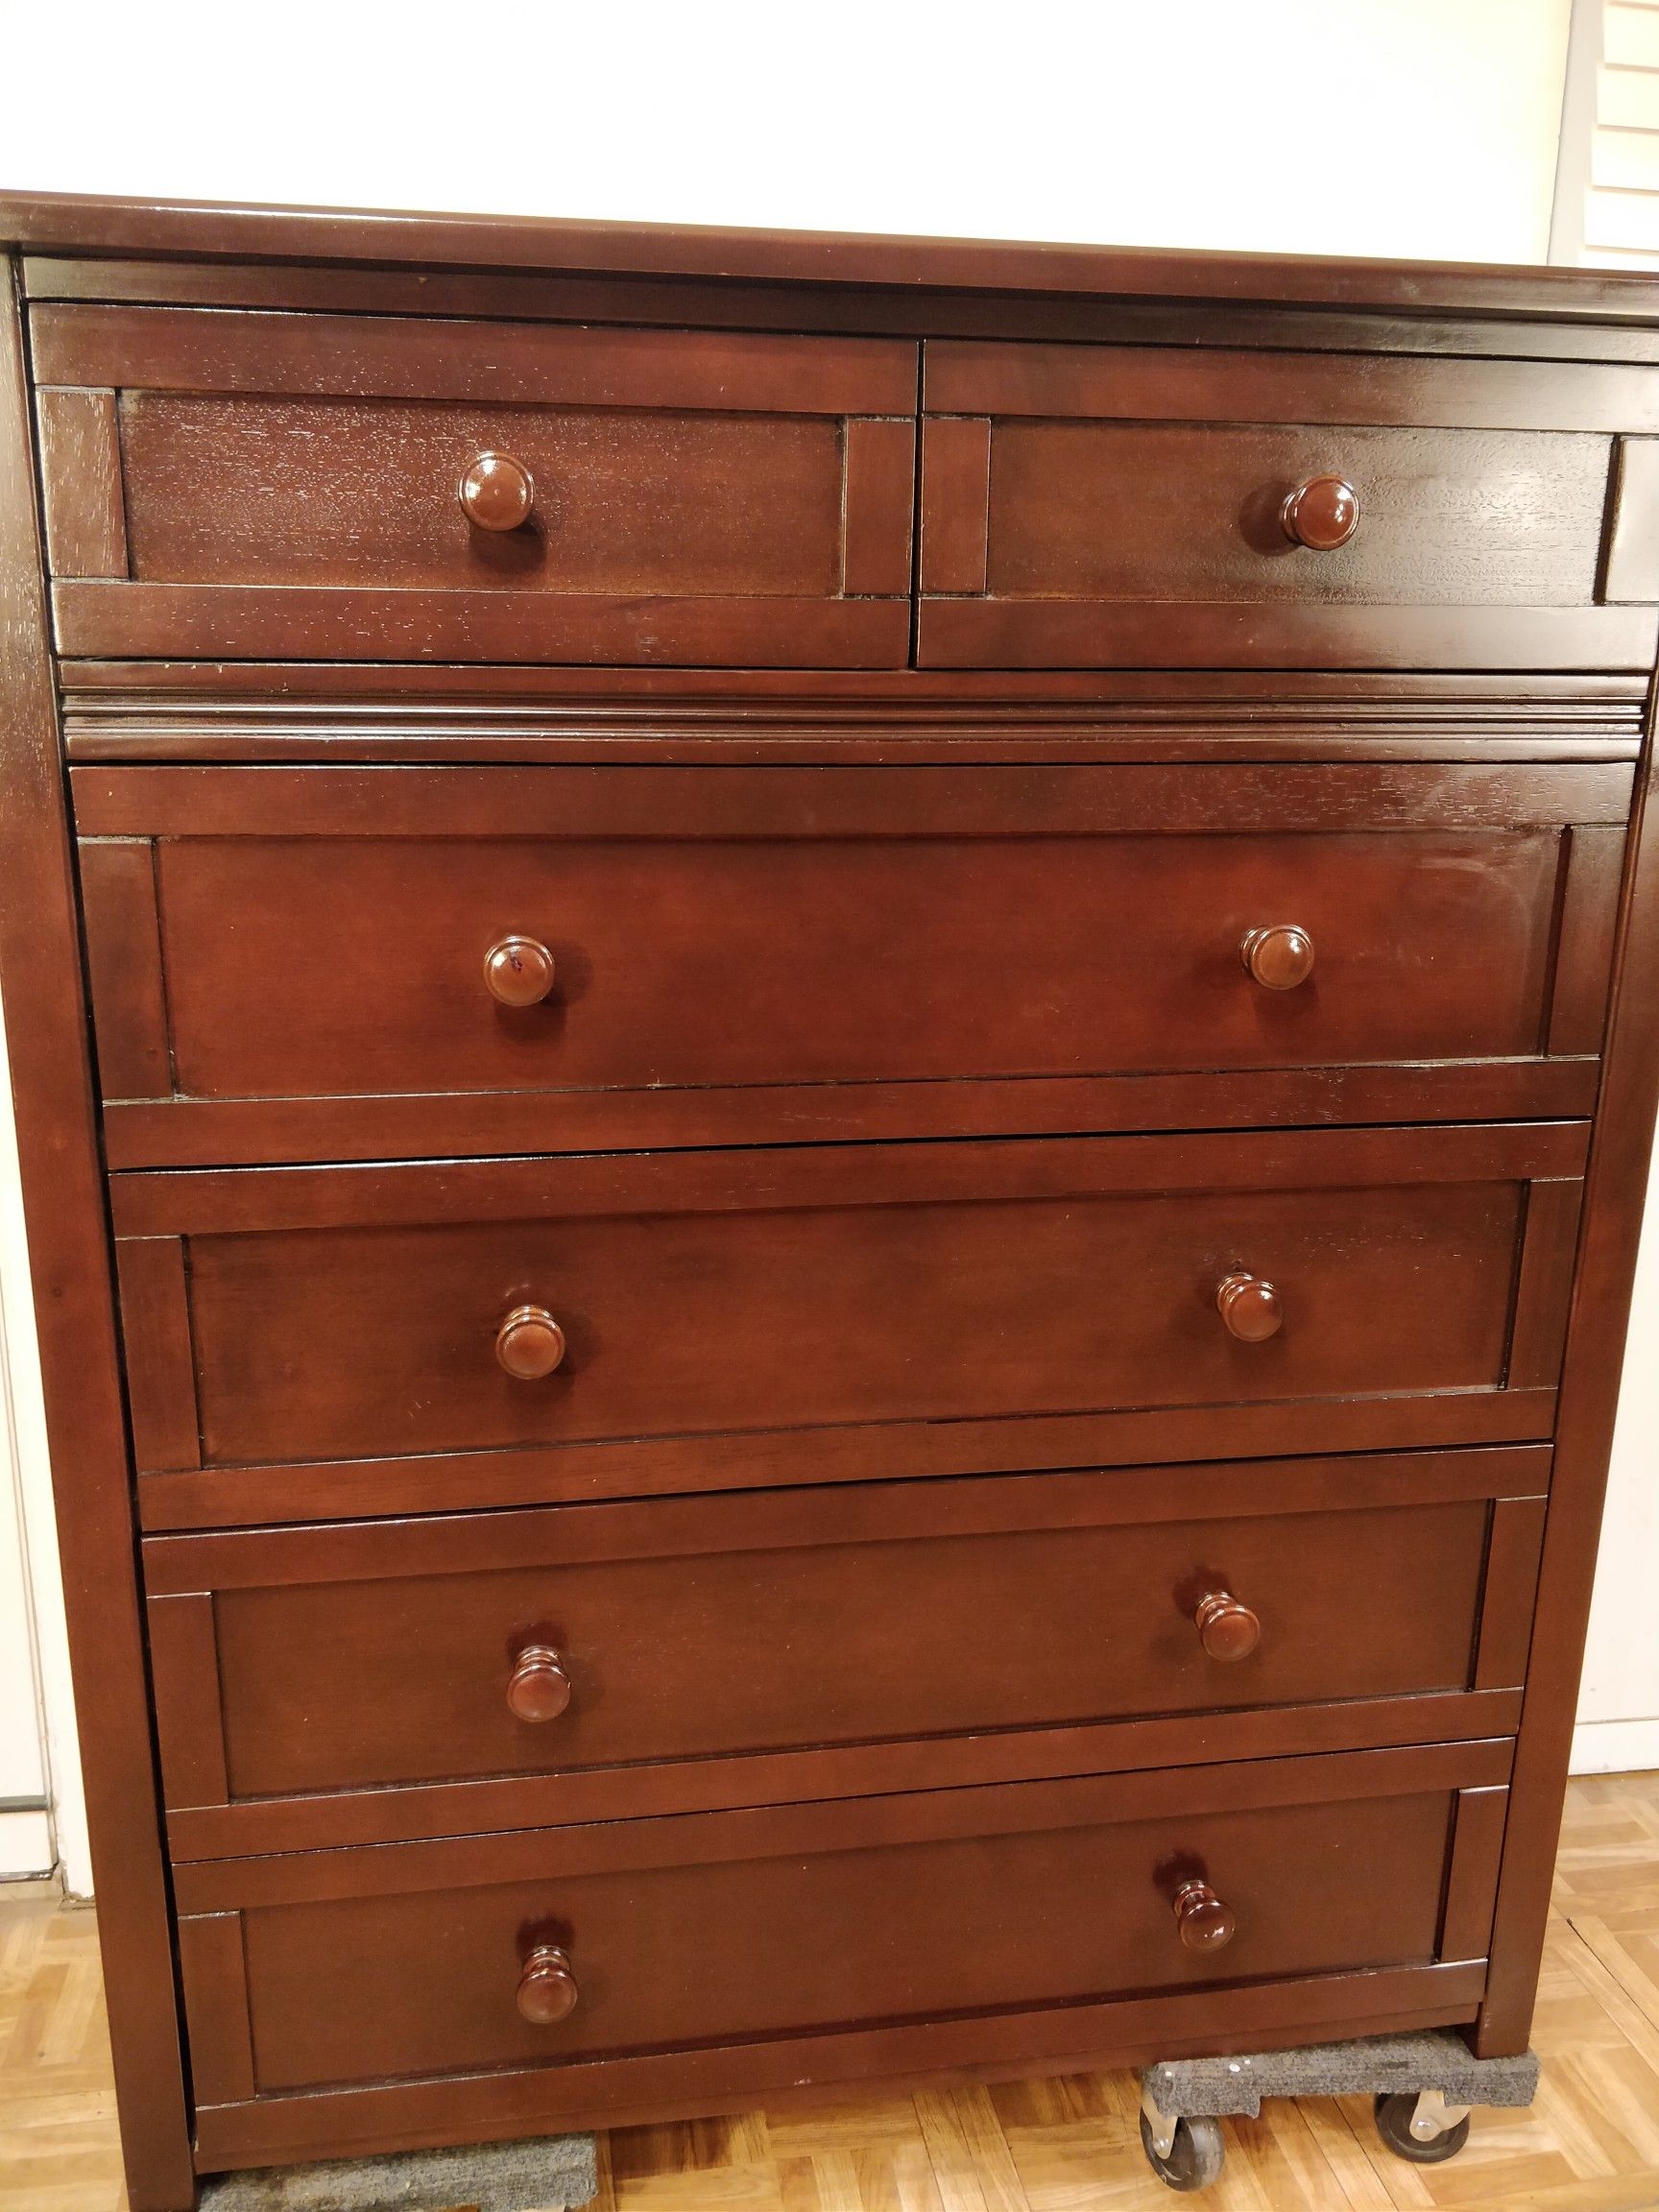 Nice modern solid wood dresser with 6 drawers in great condition, all drawers working well, dovetail drawers. L41.5"*W18.5"*H48"